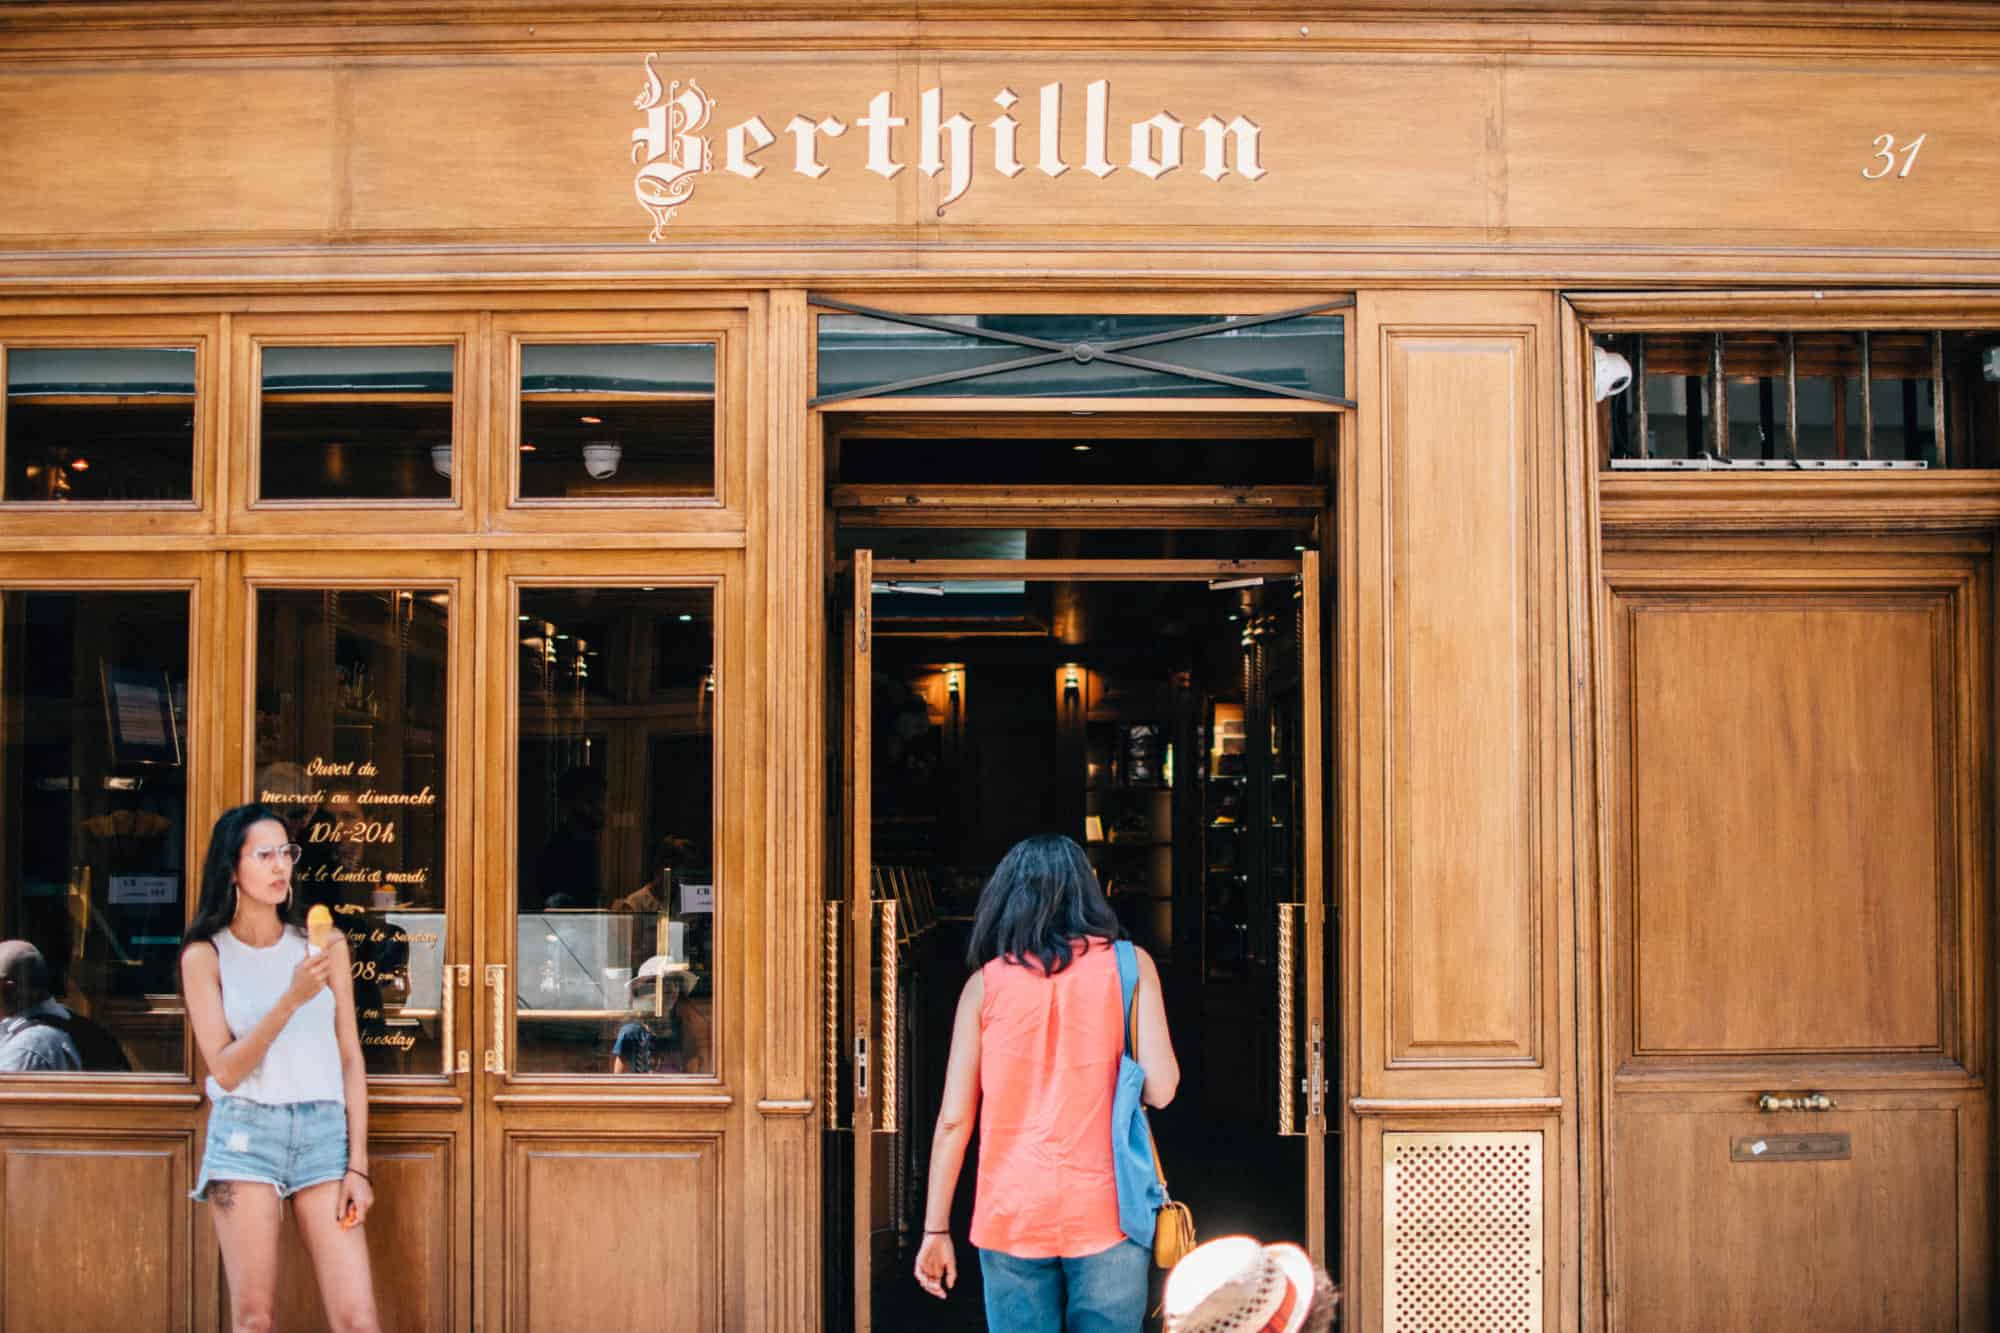 The wood-paneled exterior of one Paris's Berthillon ice cream shops with a young woman standing outside, enjoying one of their soft ice creams.